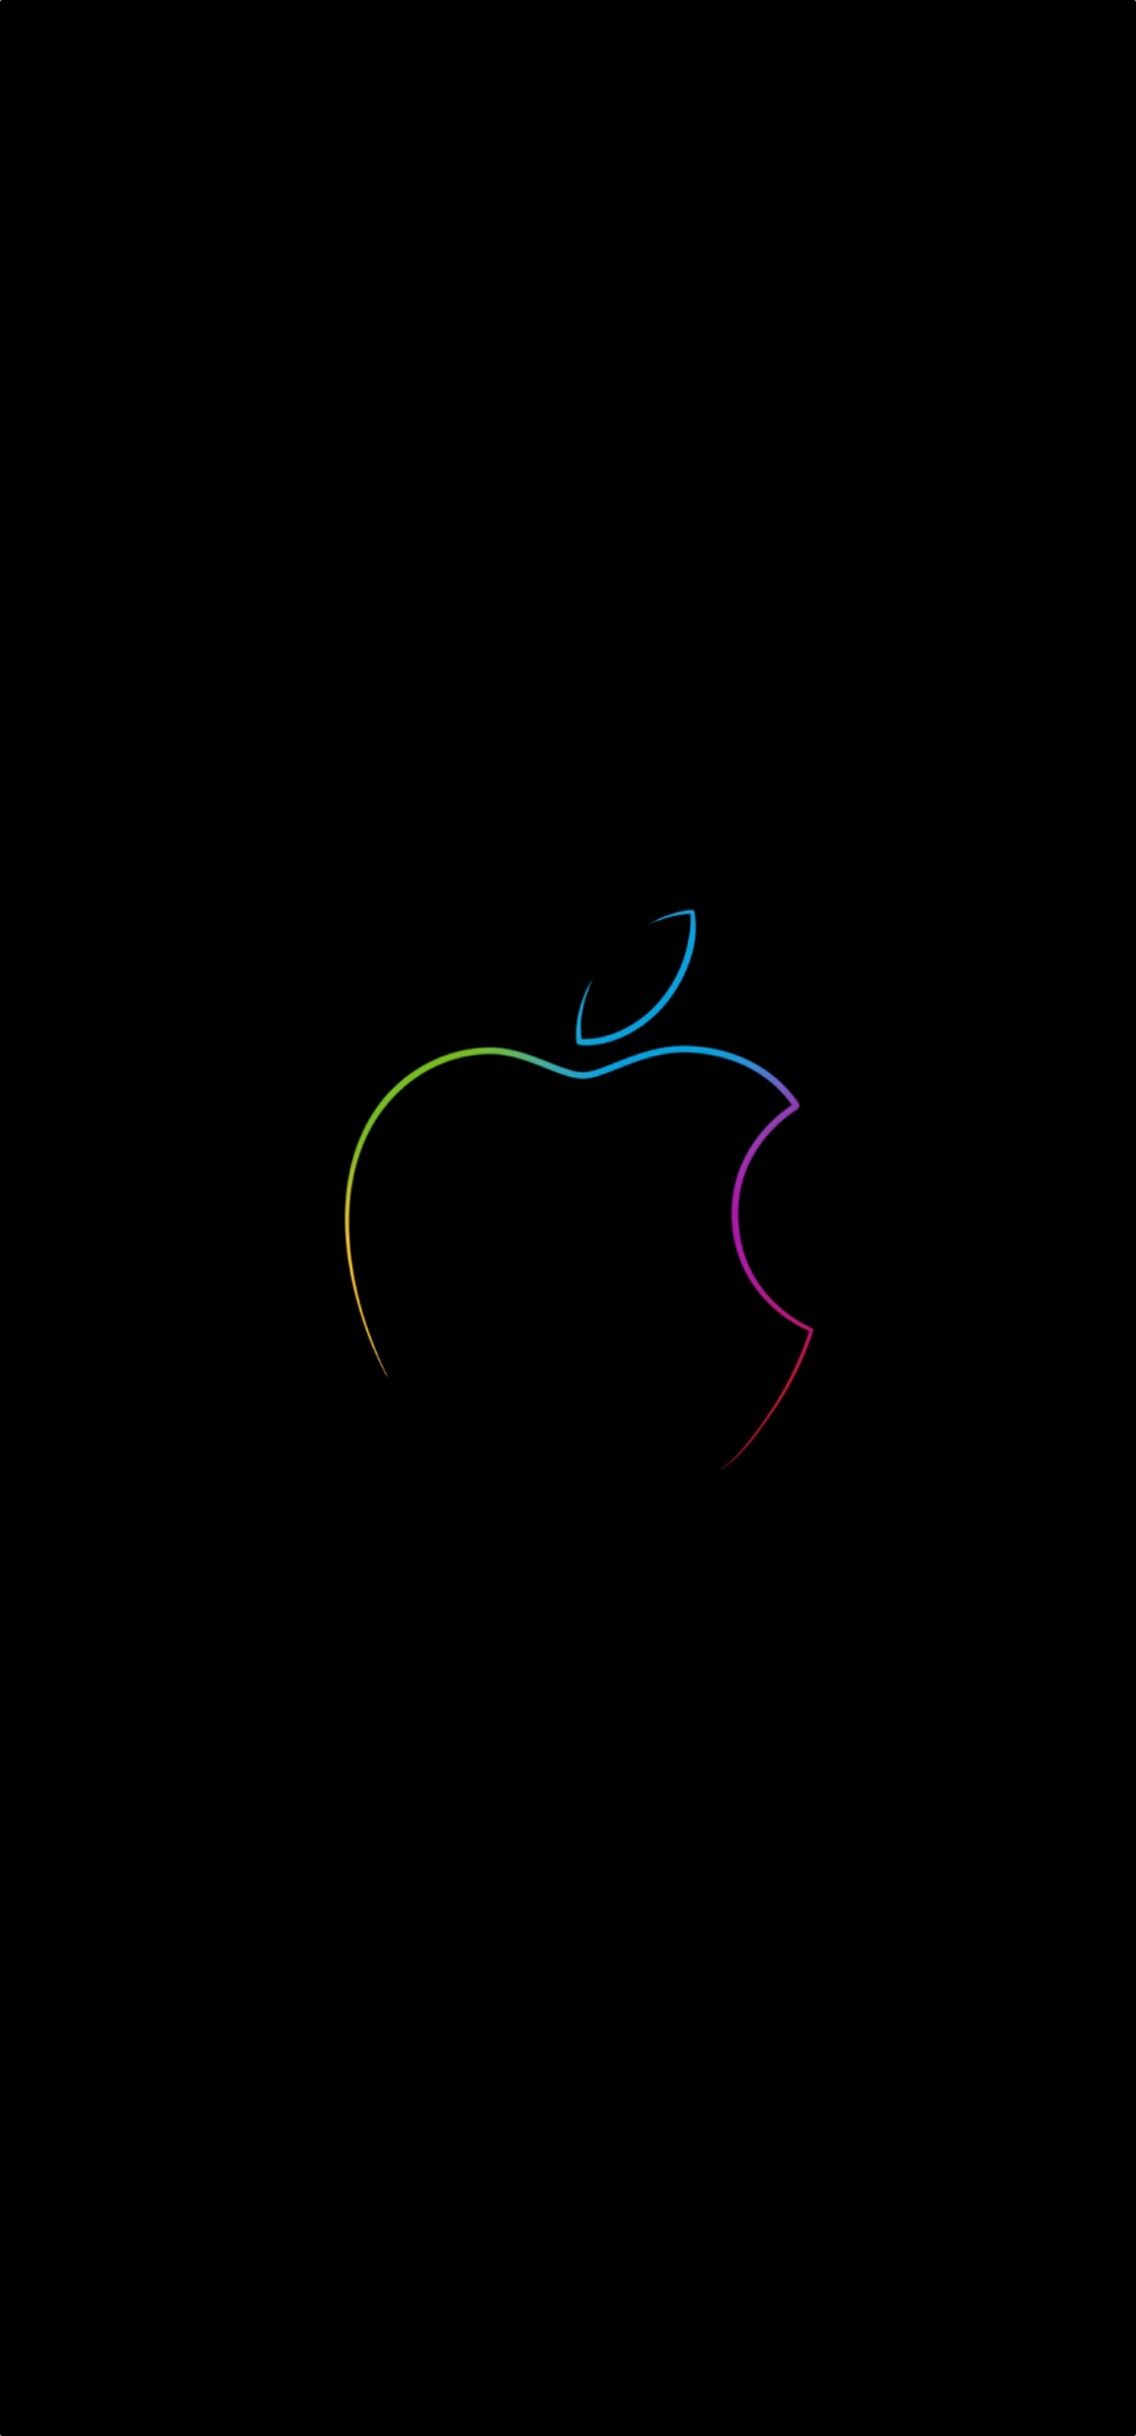 Download Apple Store Wallpaper Featuring The Colorful Apple Logo